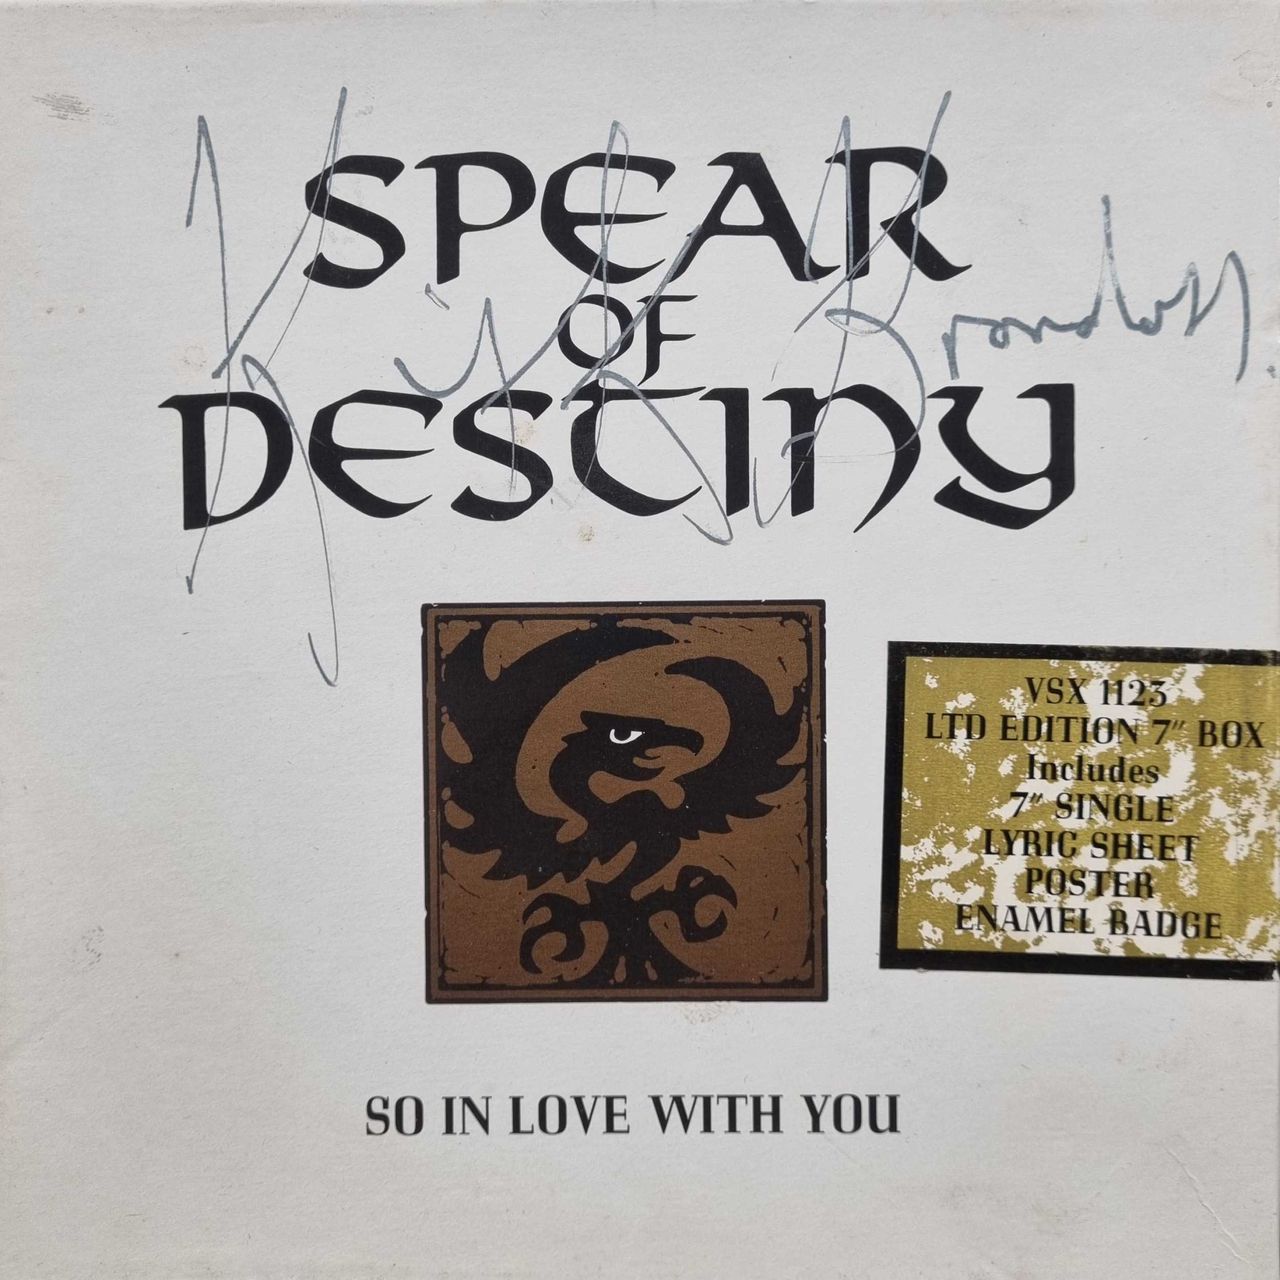 Spear Of Destiny So In Love With You - Autographed UK 7" single box set VSX1123